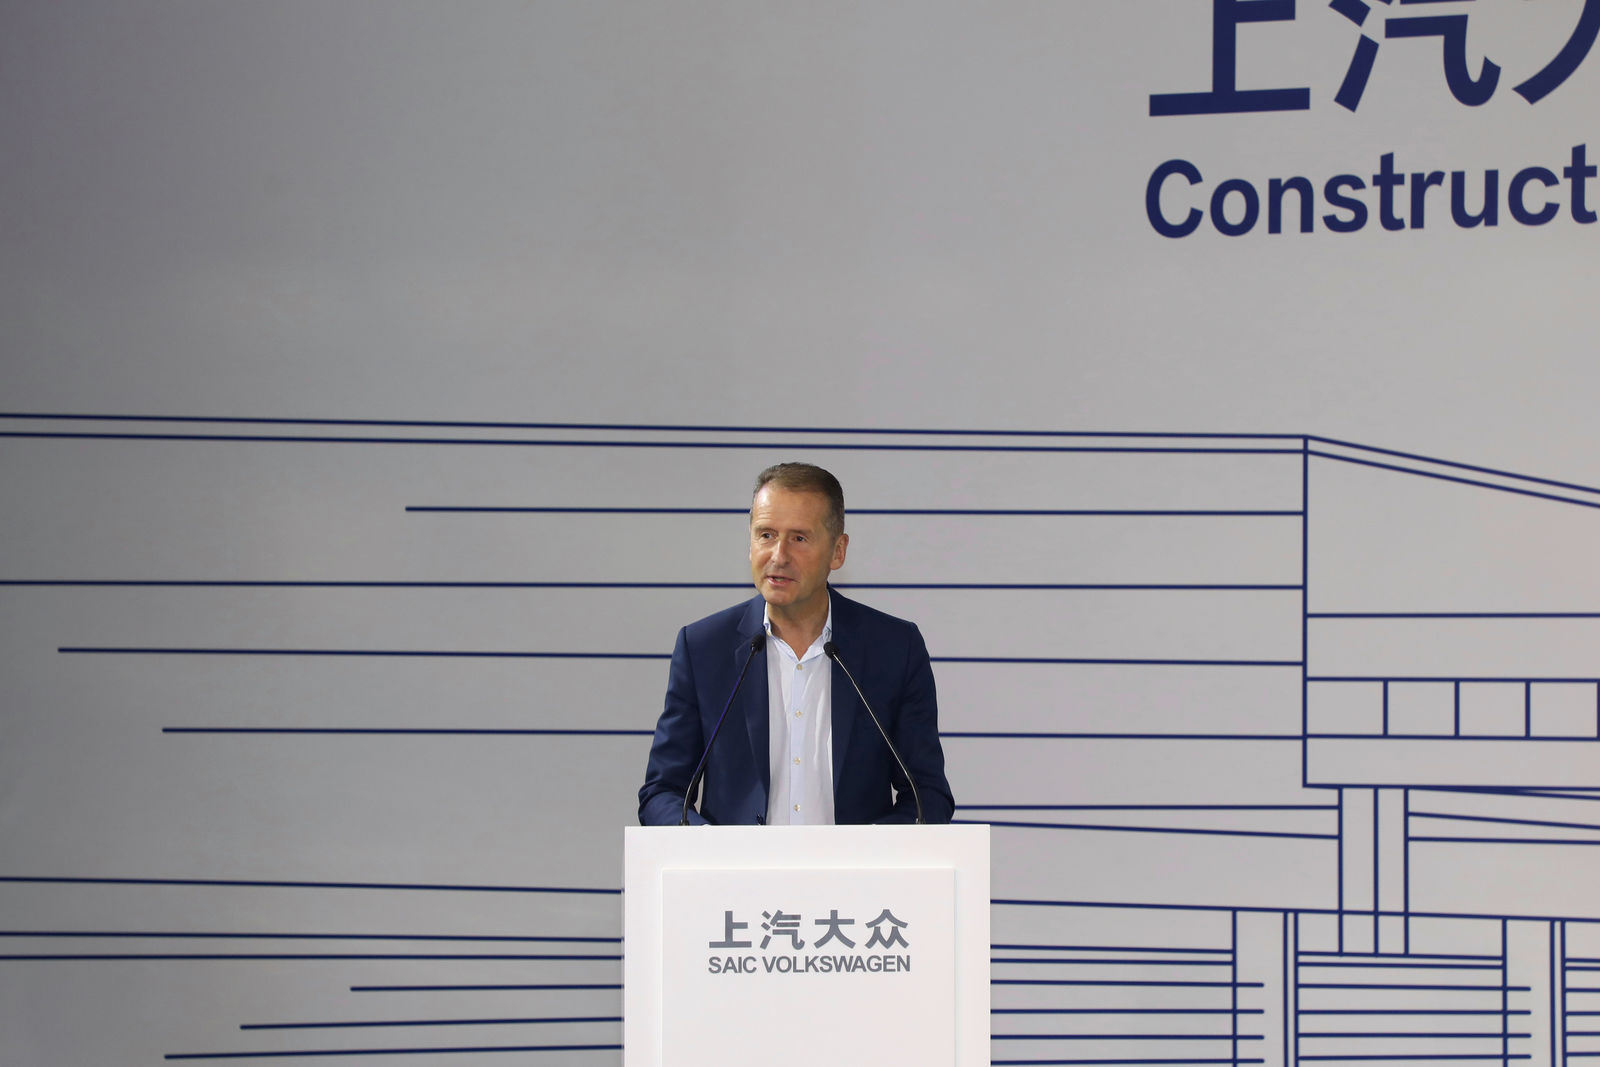 Volkswagen starts pre-production in first plant purely focused on e-mobility in China